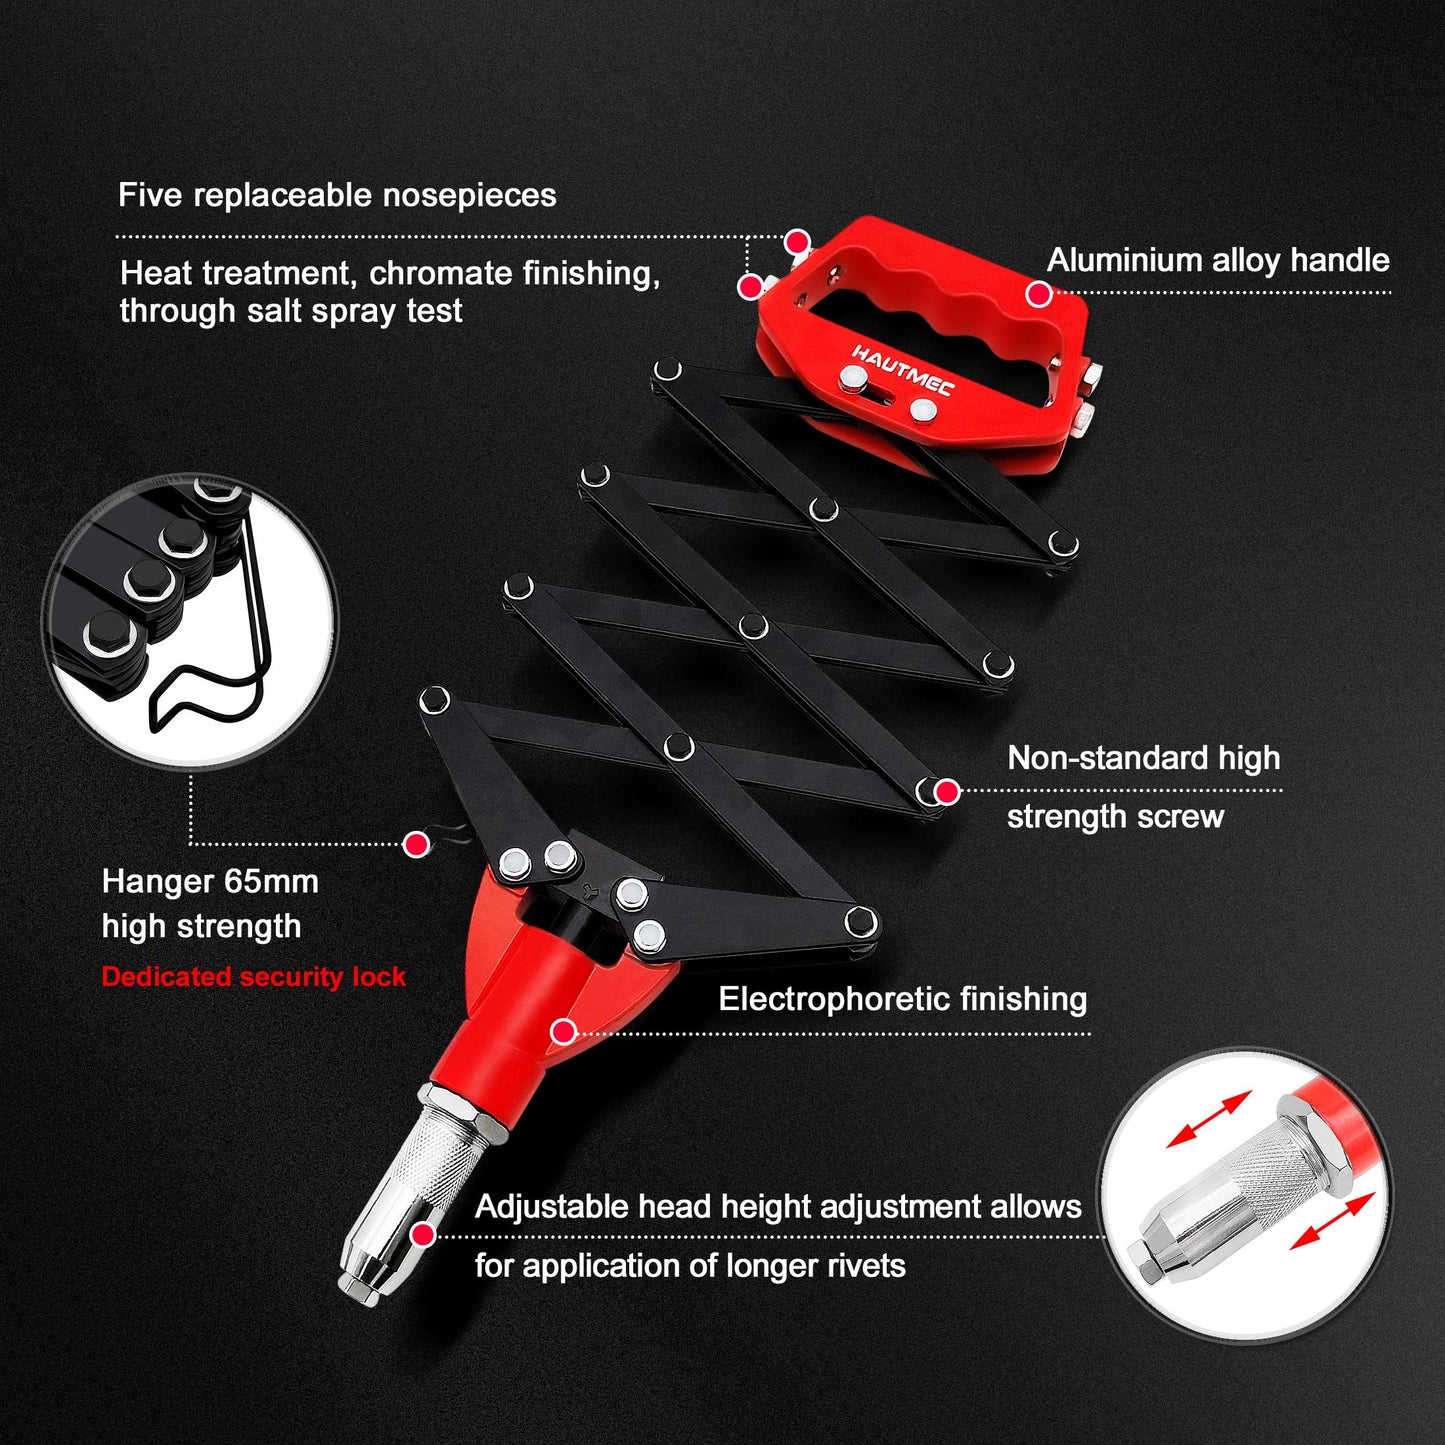 HAUTMEC Expert Heavy-Duty Lazy Tong Pop Riveter With 5 Replaceable Nosepieces, Single pull Action Riveter, Fast Riveting for industrial use HT0130-HR